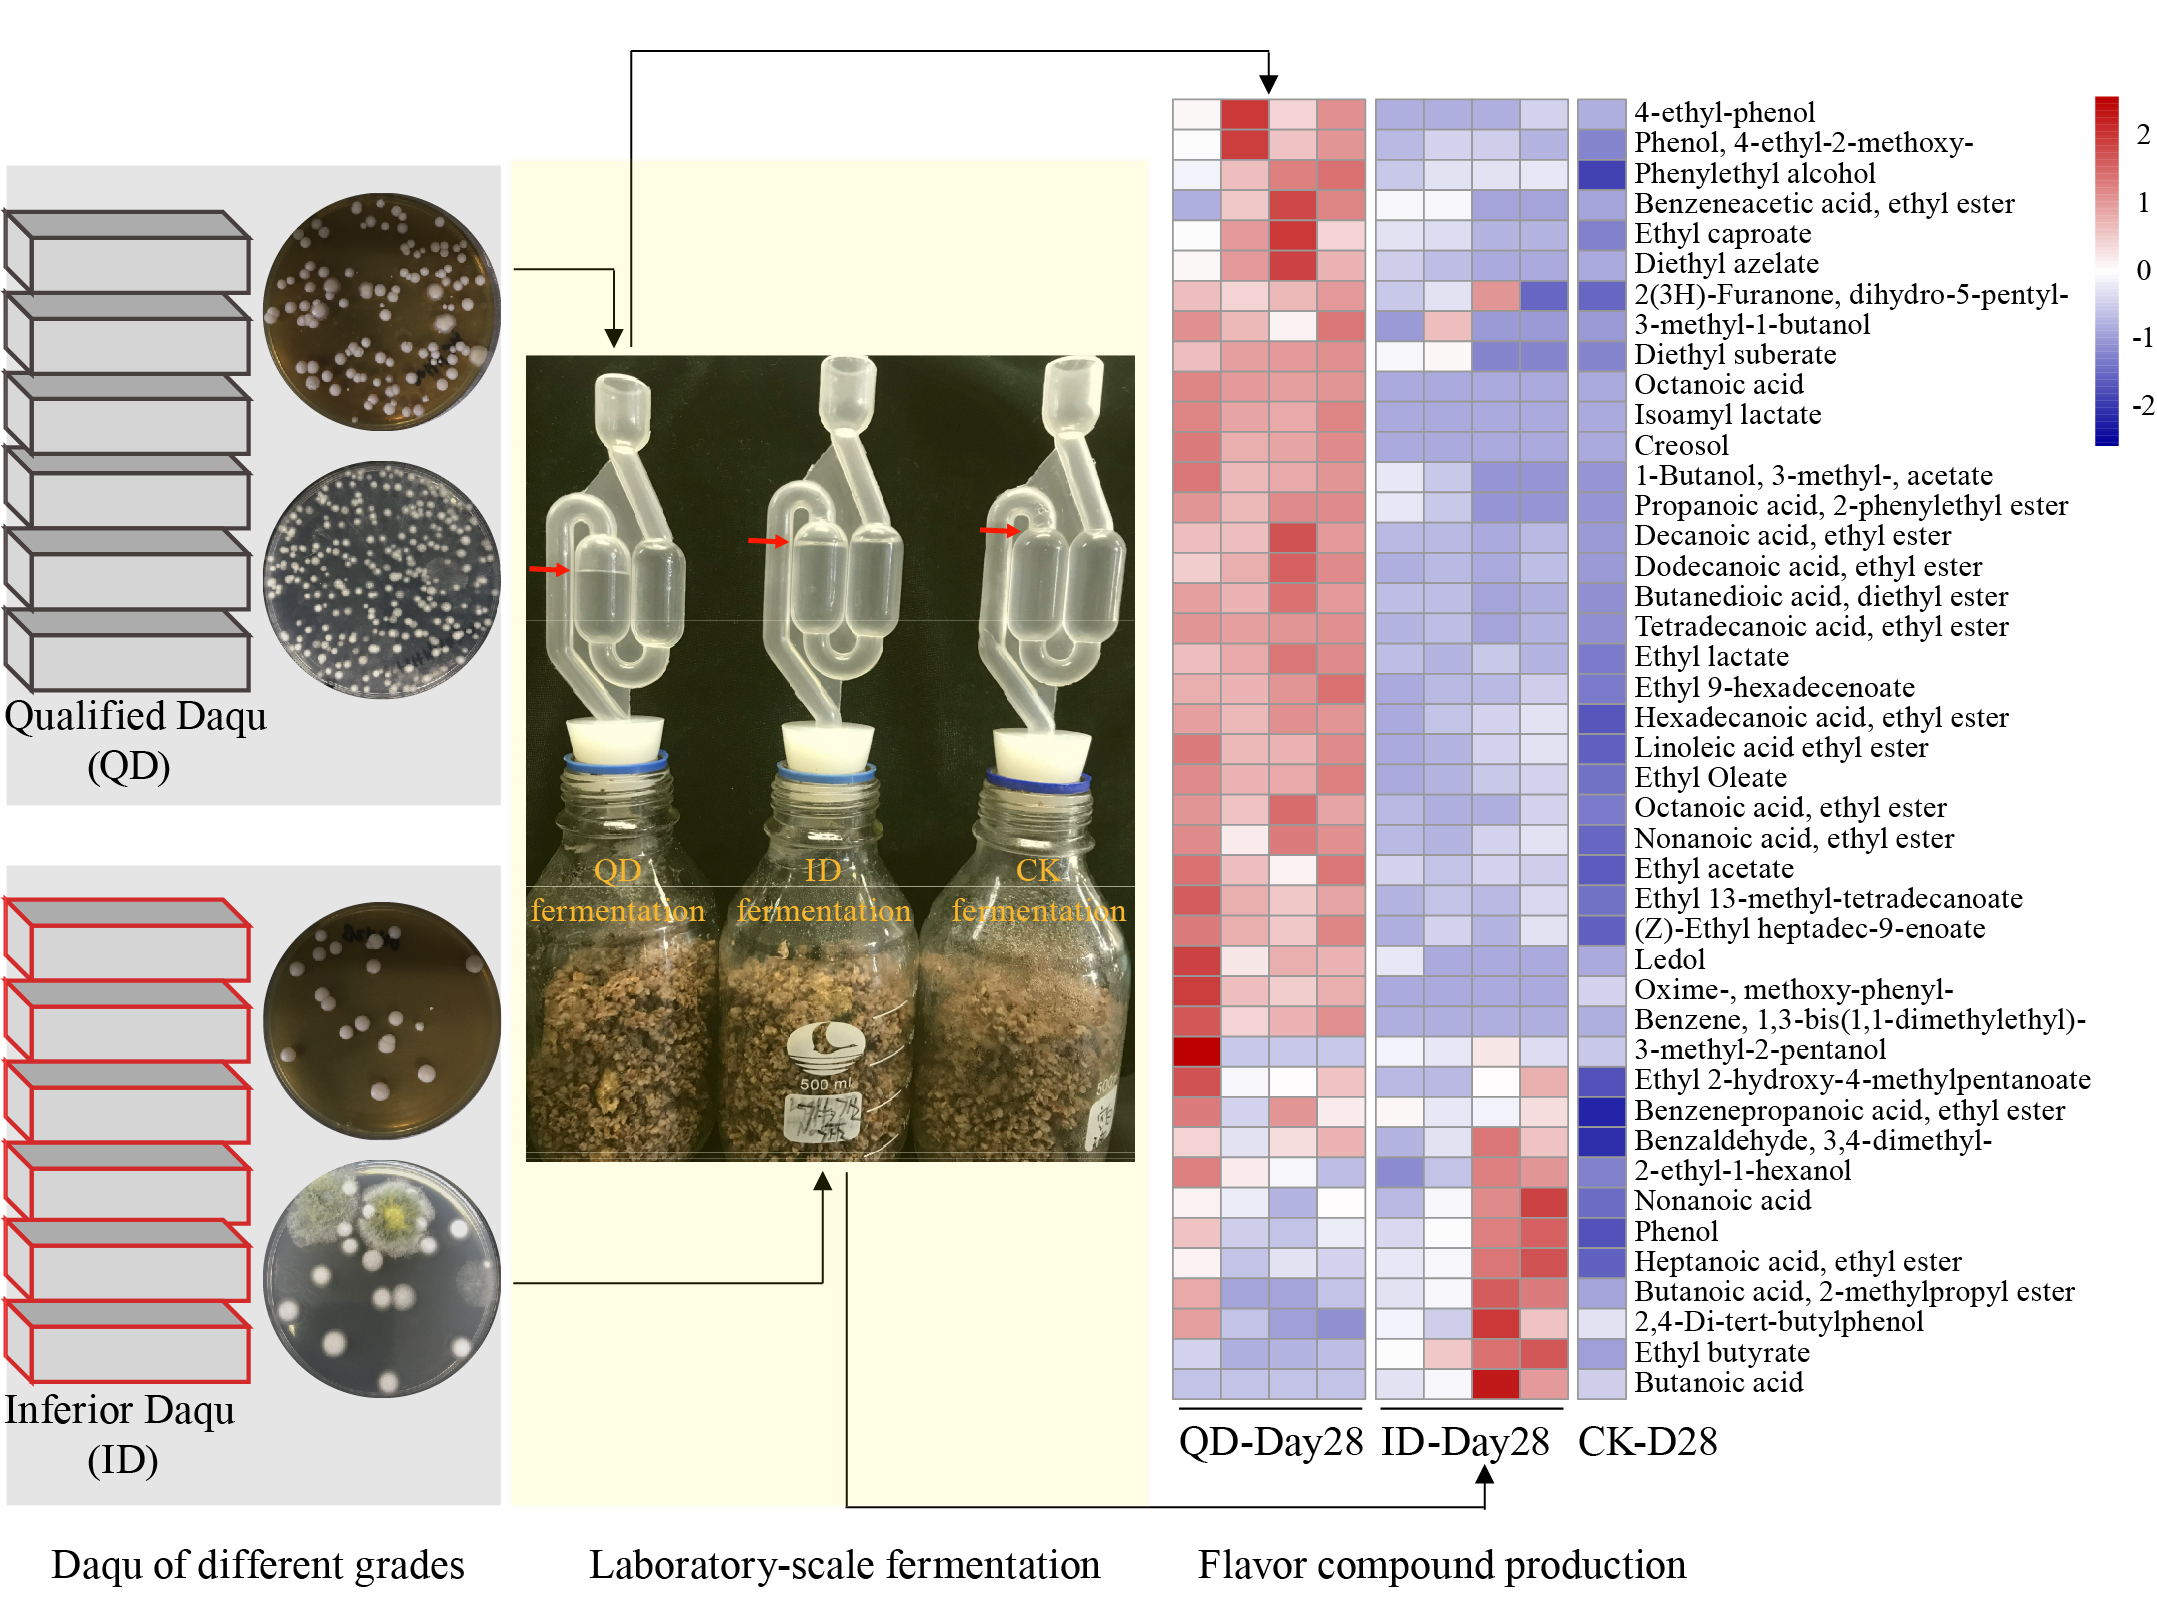 Foods | Free Full-Text | Microbial Community Affects Daqu Quality 